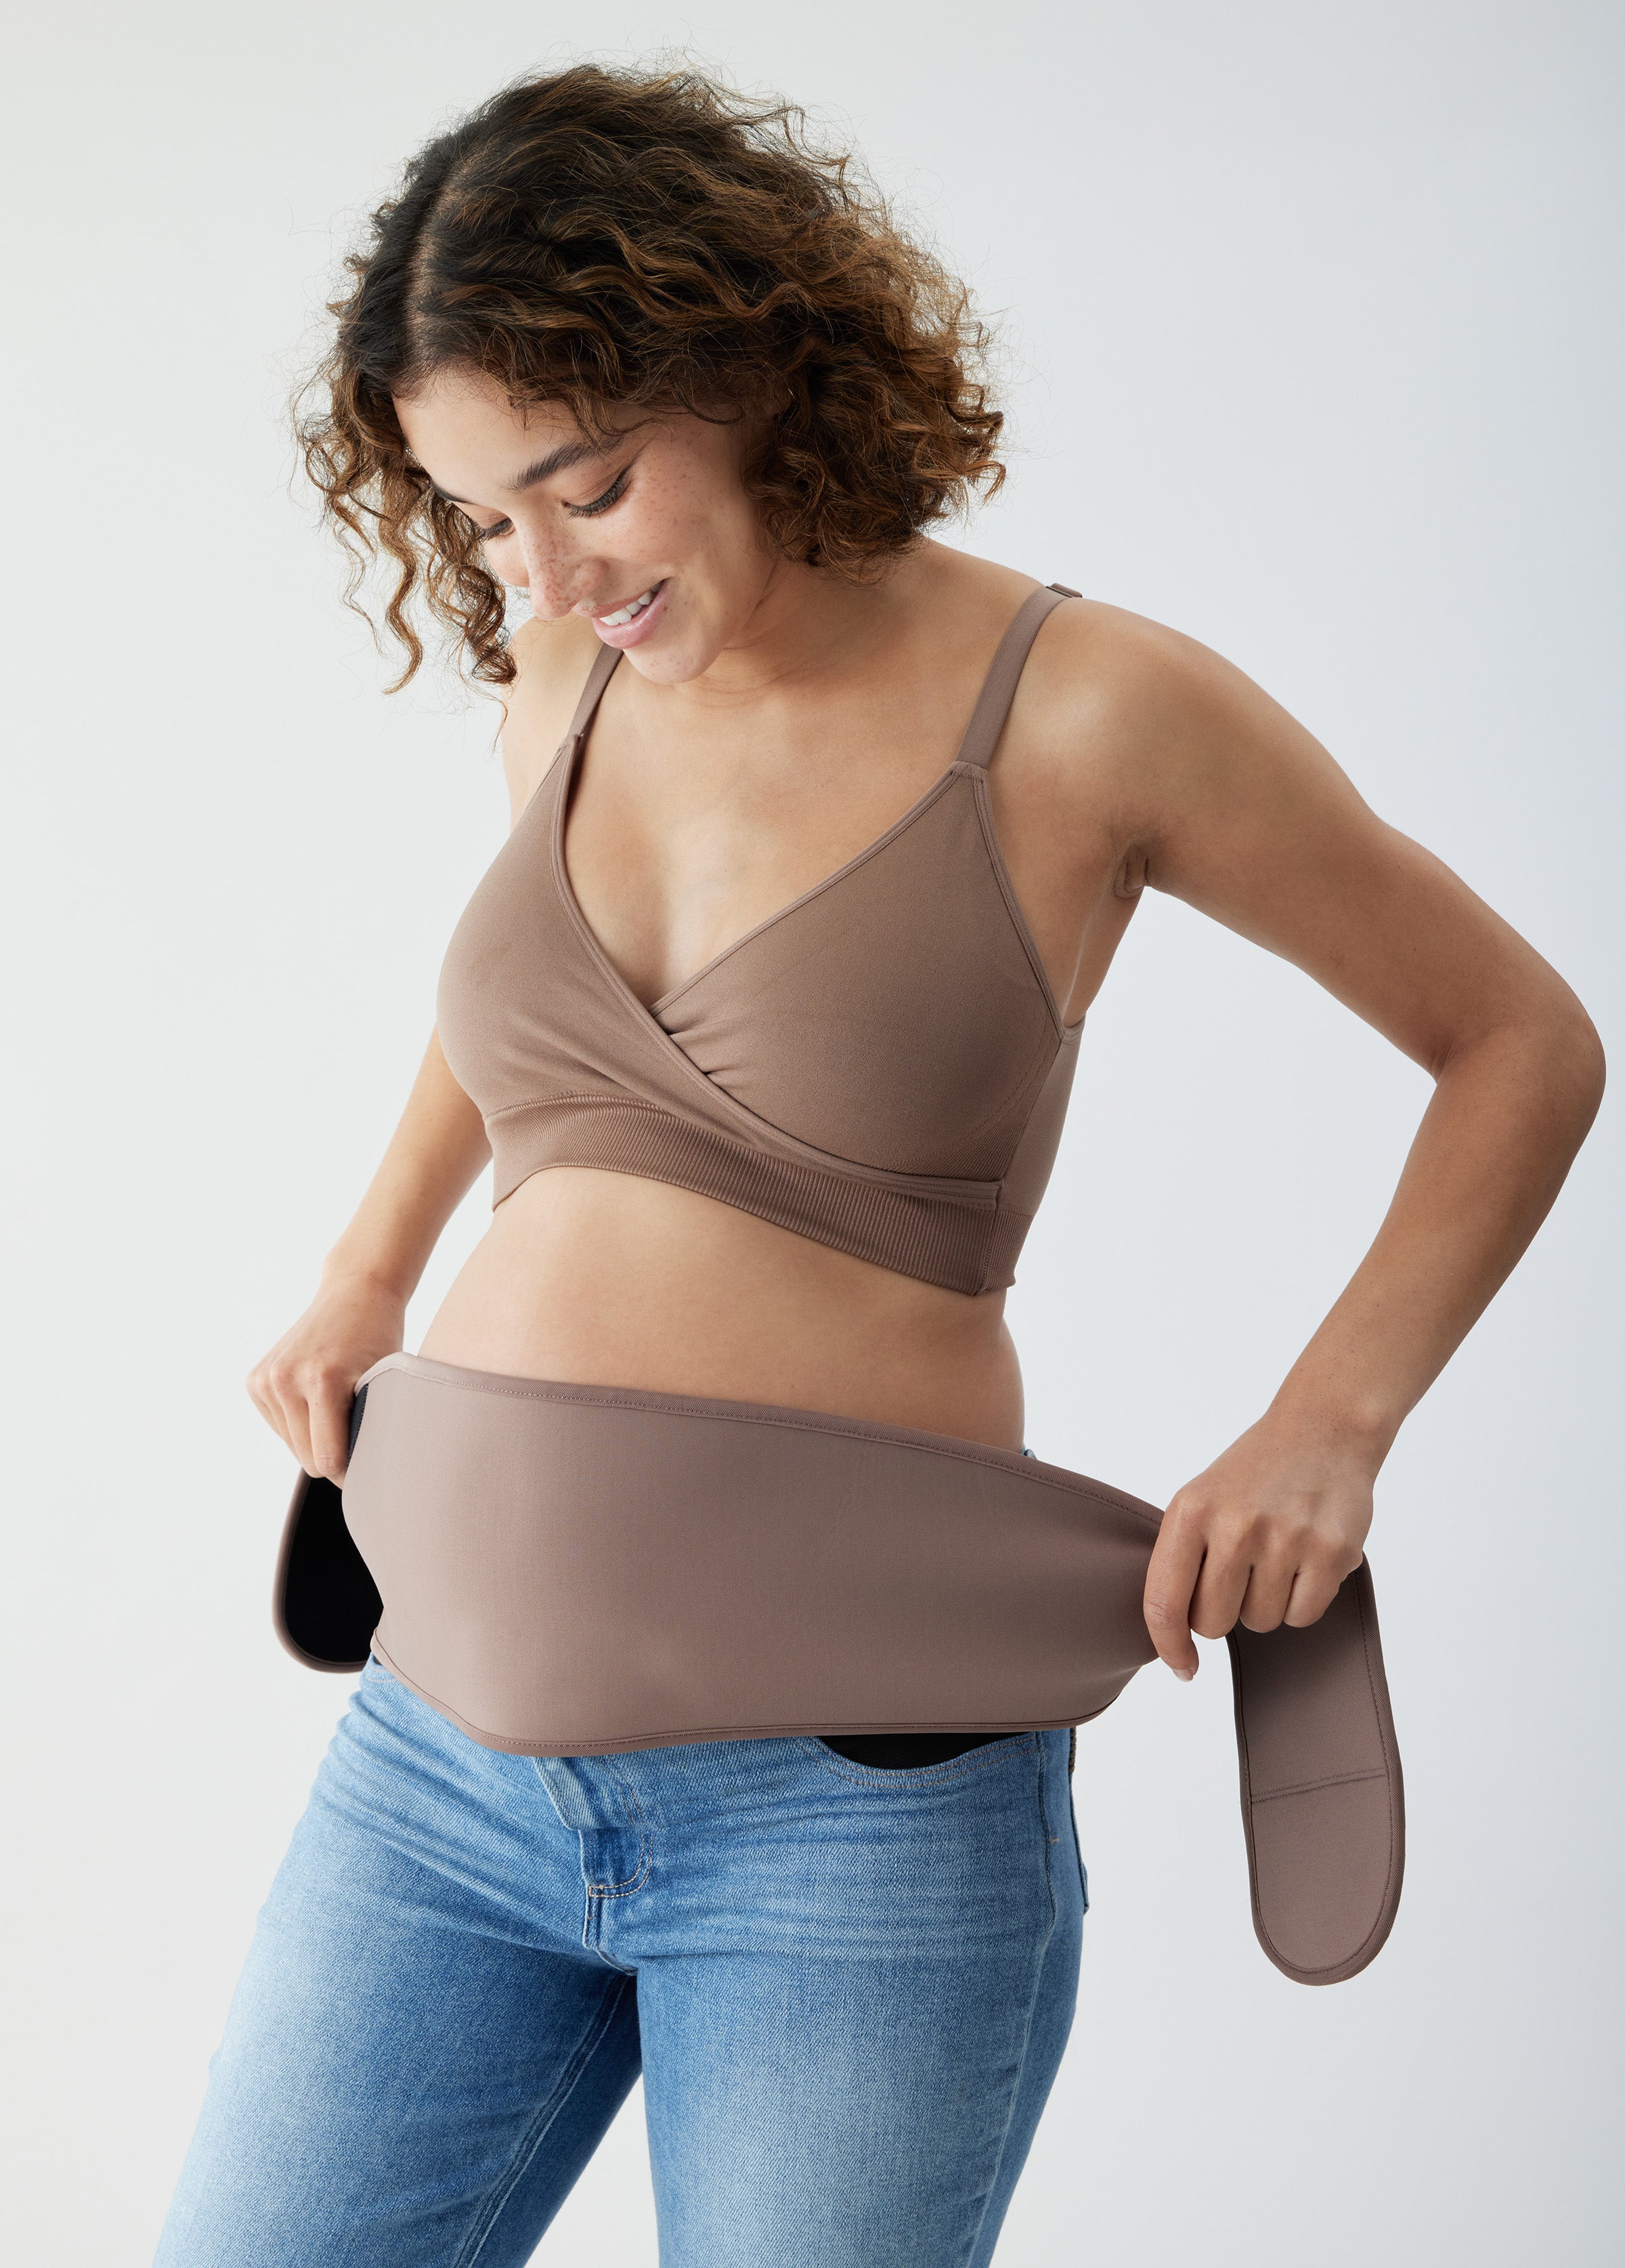 The Pregnancy Support Belt